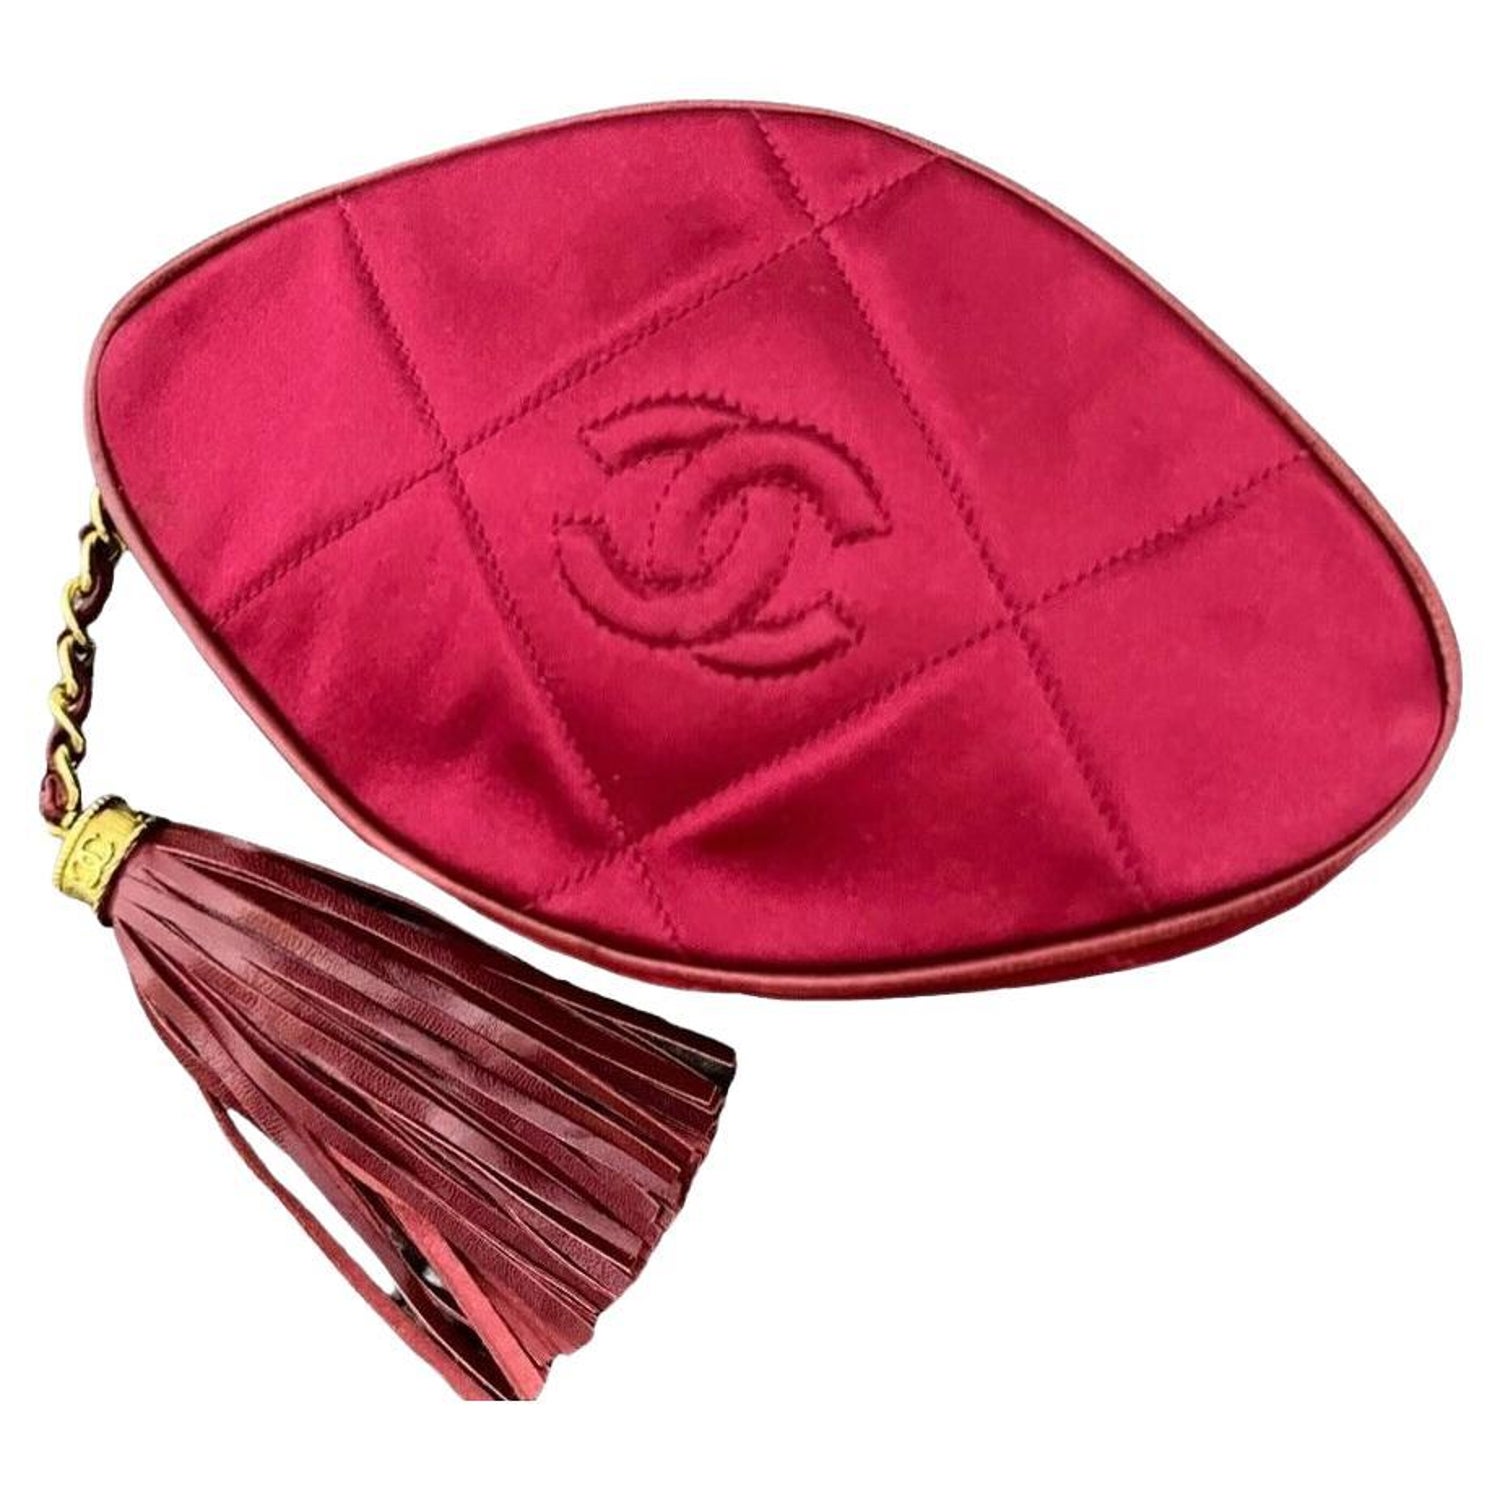 Chanel Silk Clutches - 6 For Sale on 1stDibs